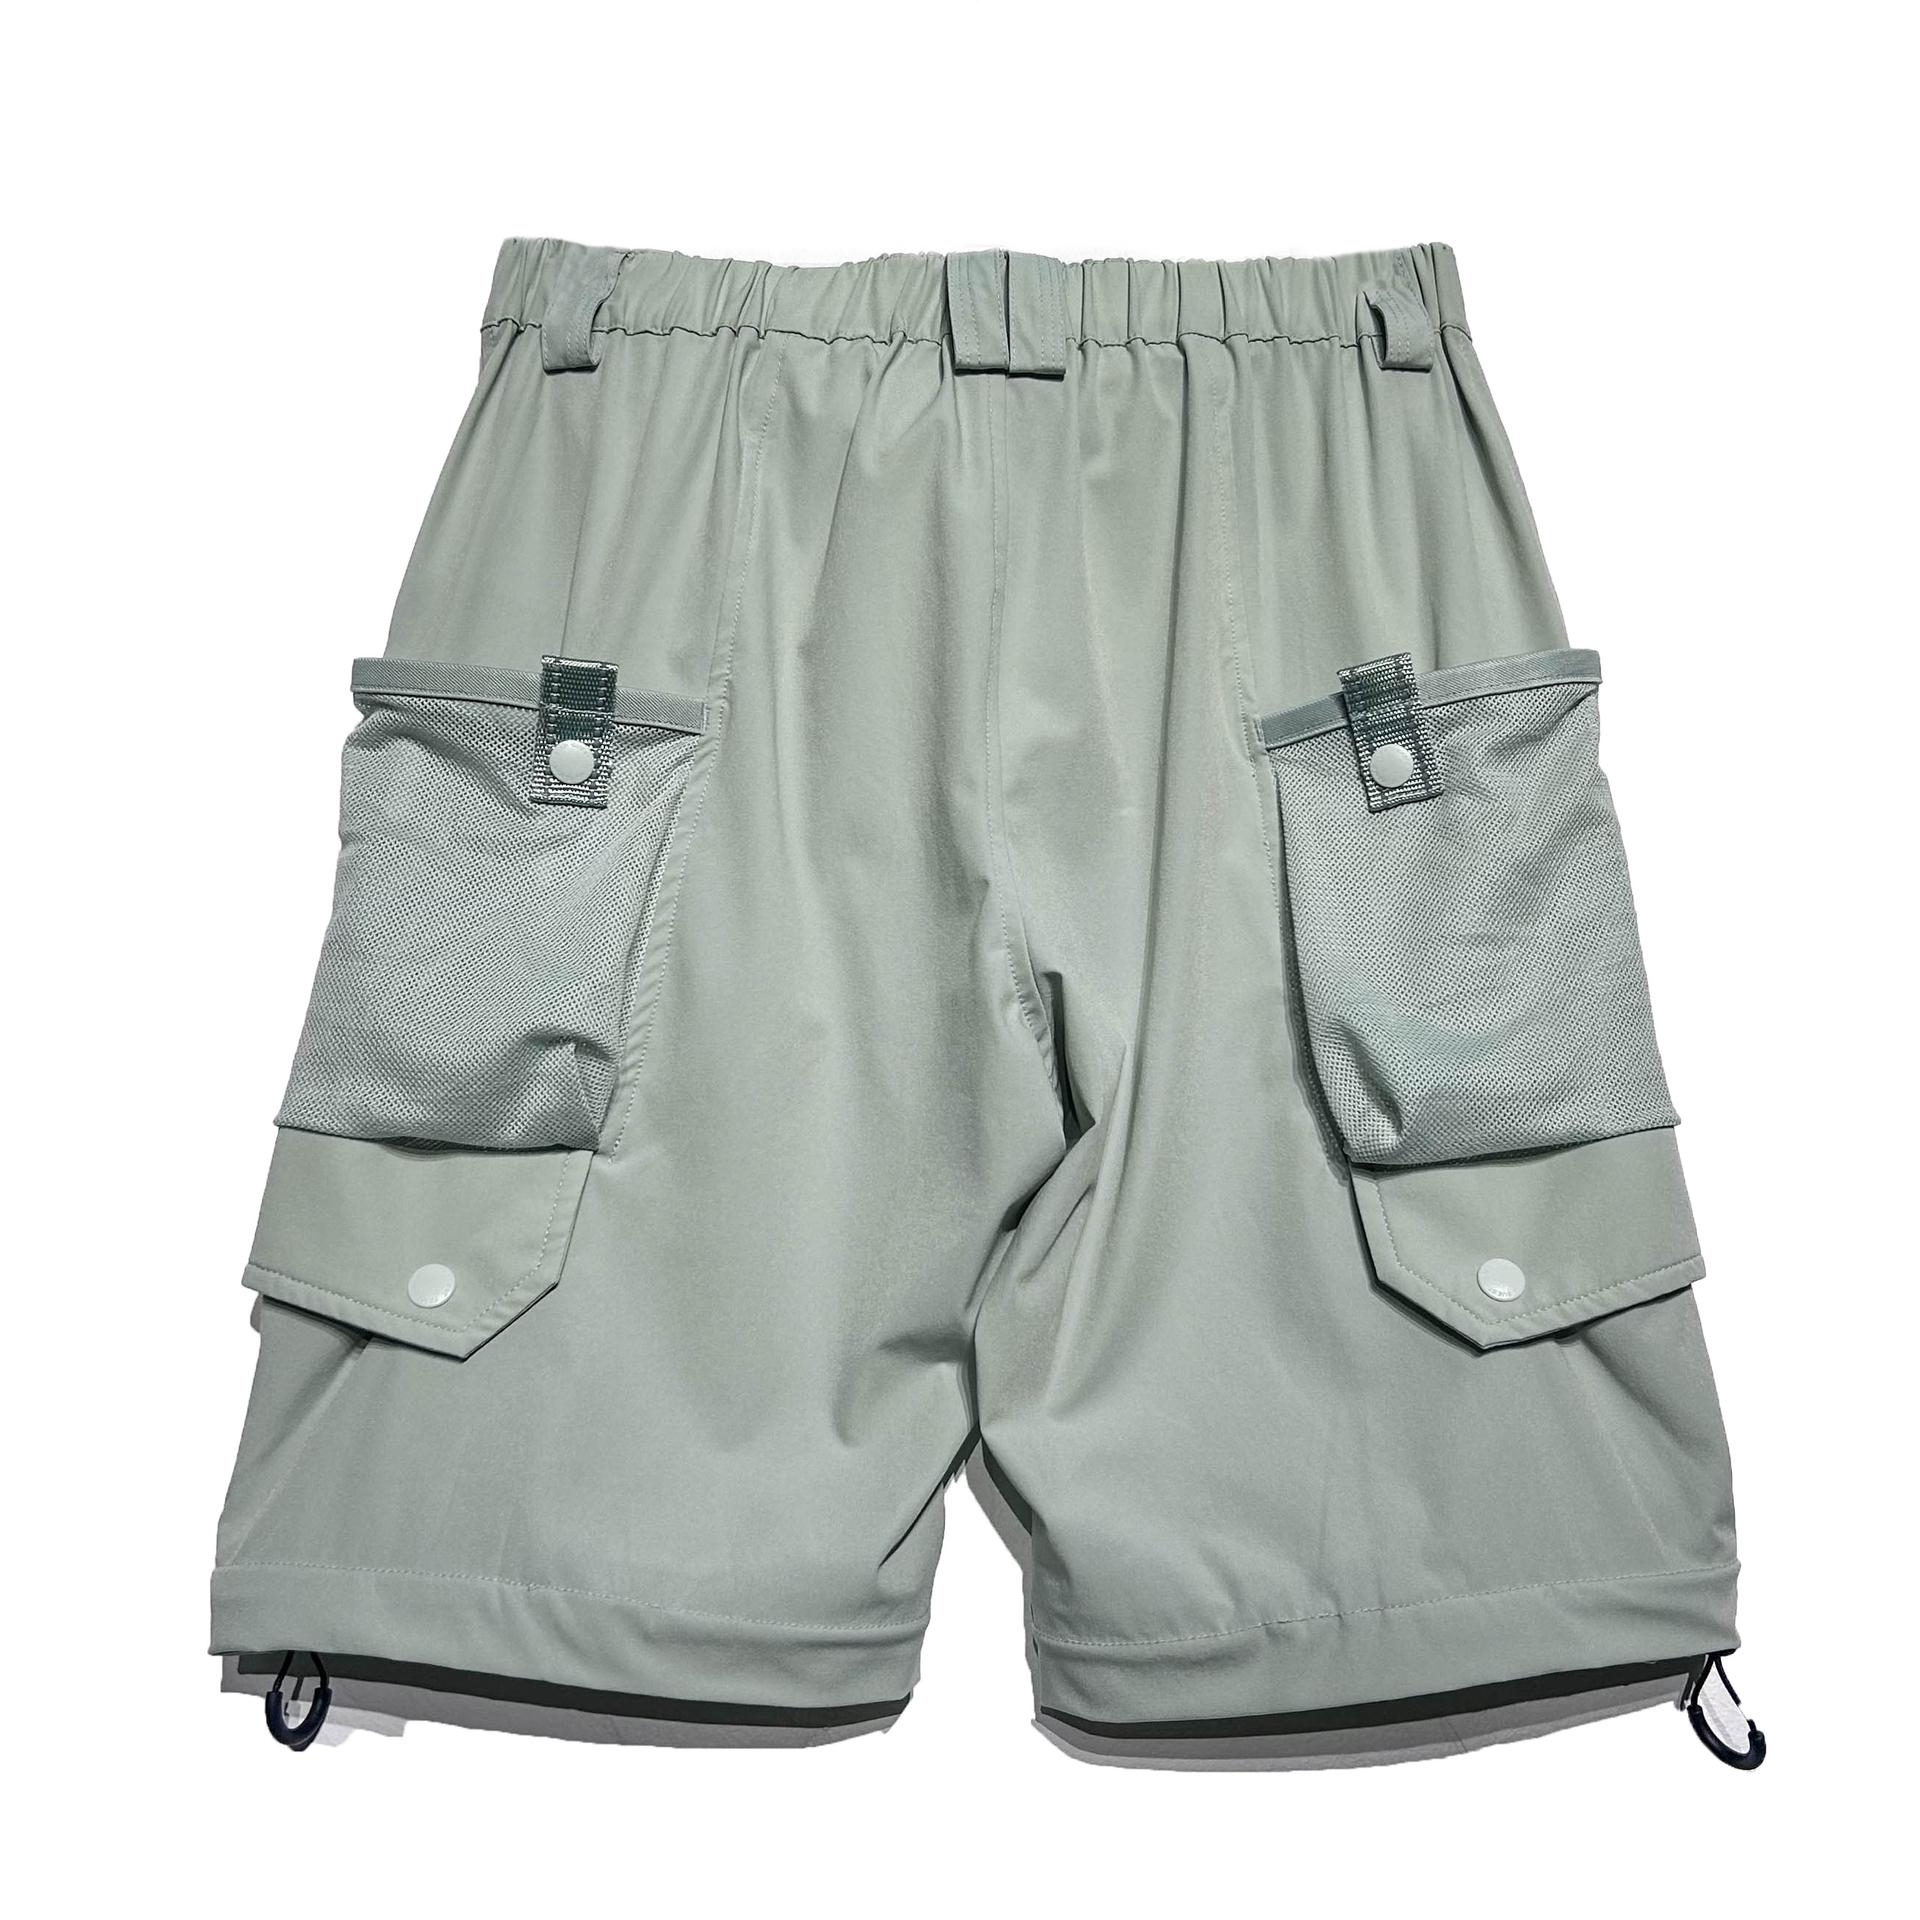 YamaGuest LP08 2-in-1 Outdoor Trousers (GRL)